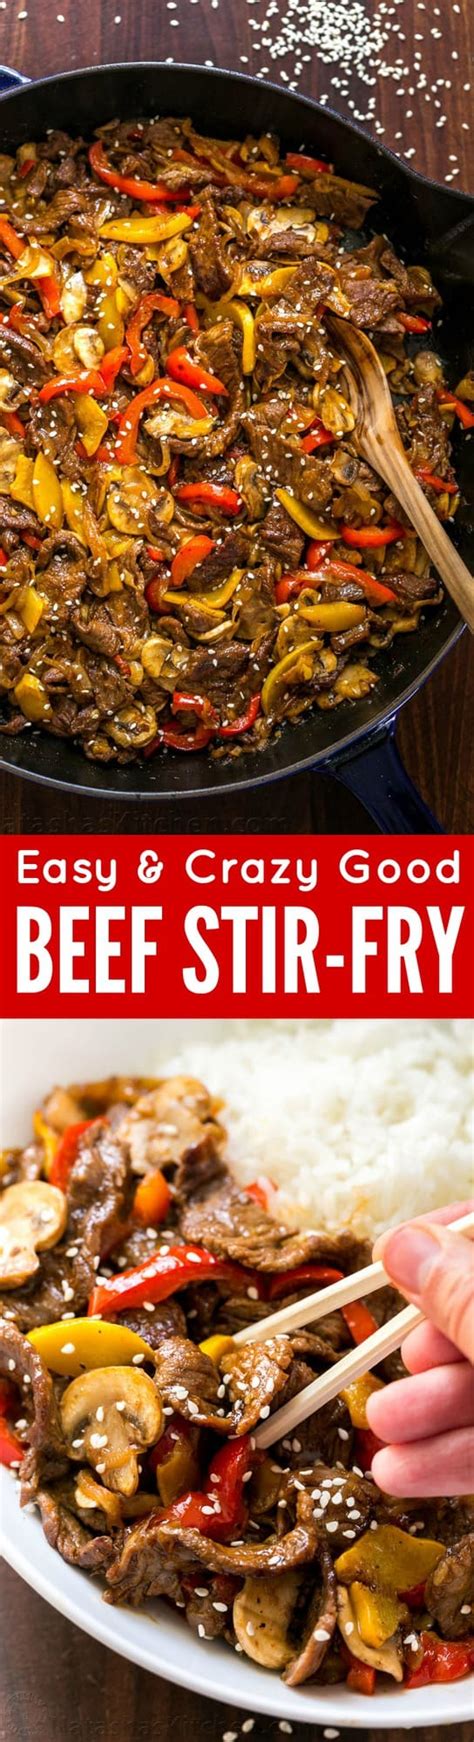 Soy sauce and a drizzling. Beef Stir-Fry Recipe with 3 Ingredient Sauce - NatashasKitchen.com